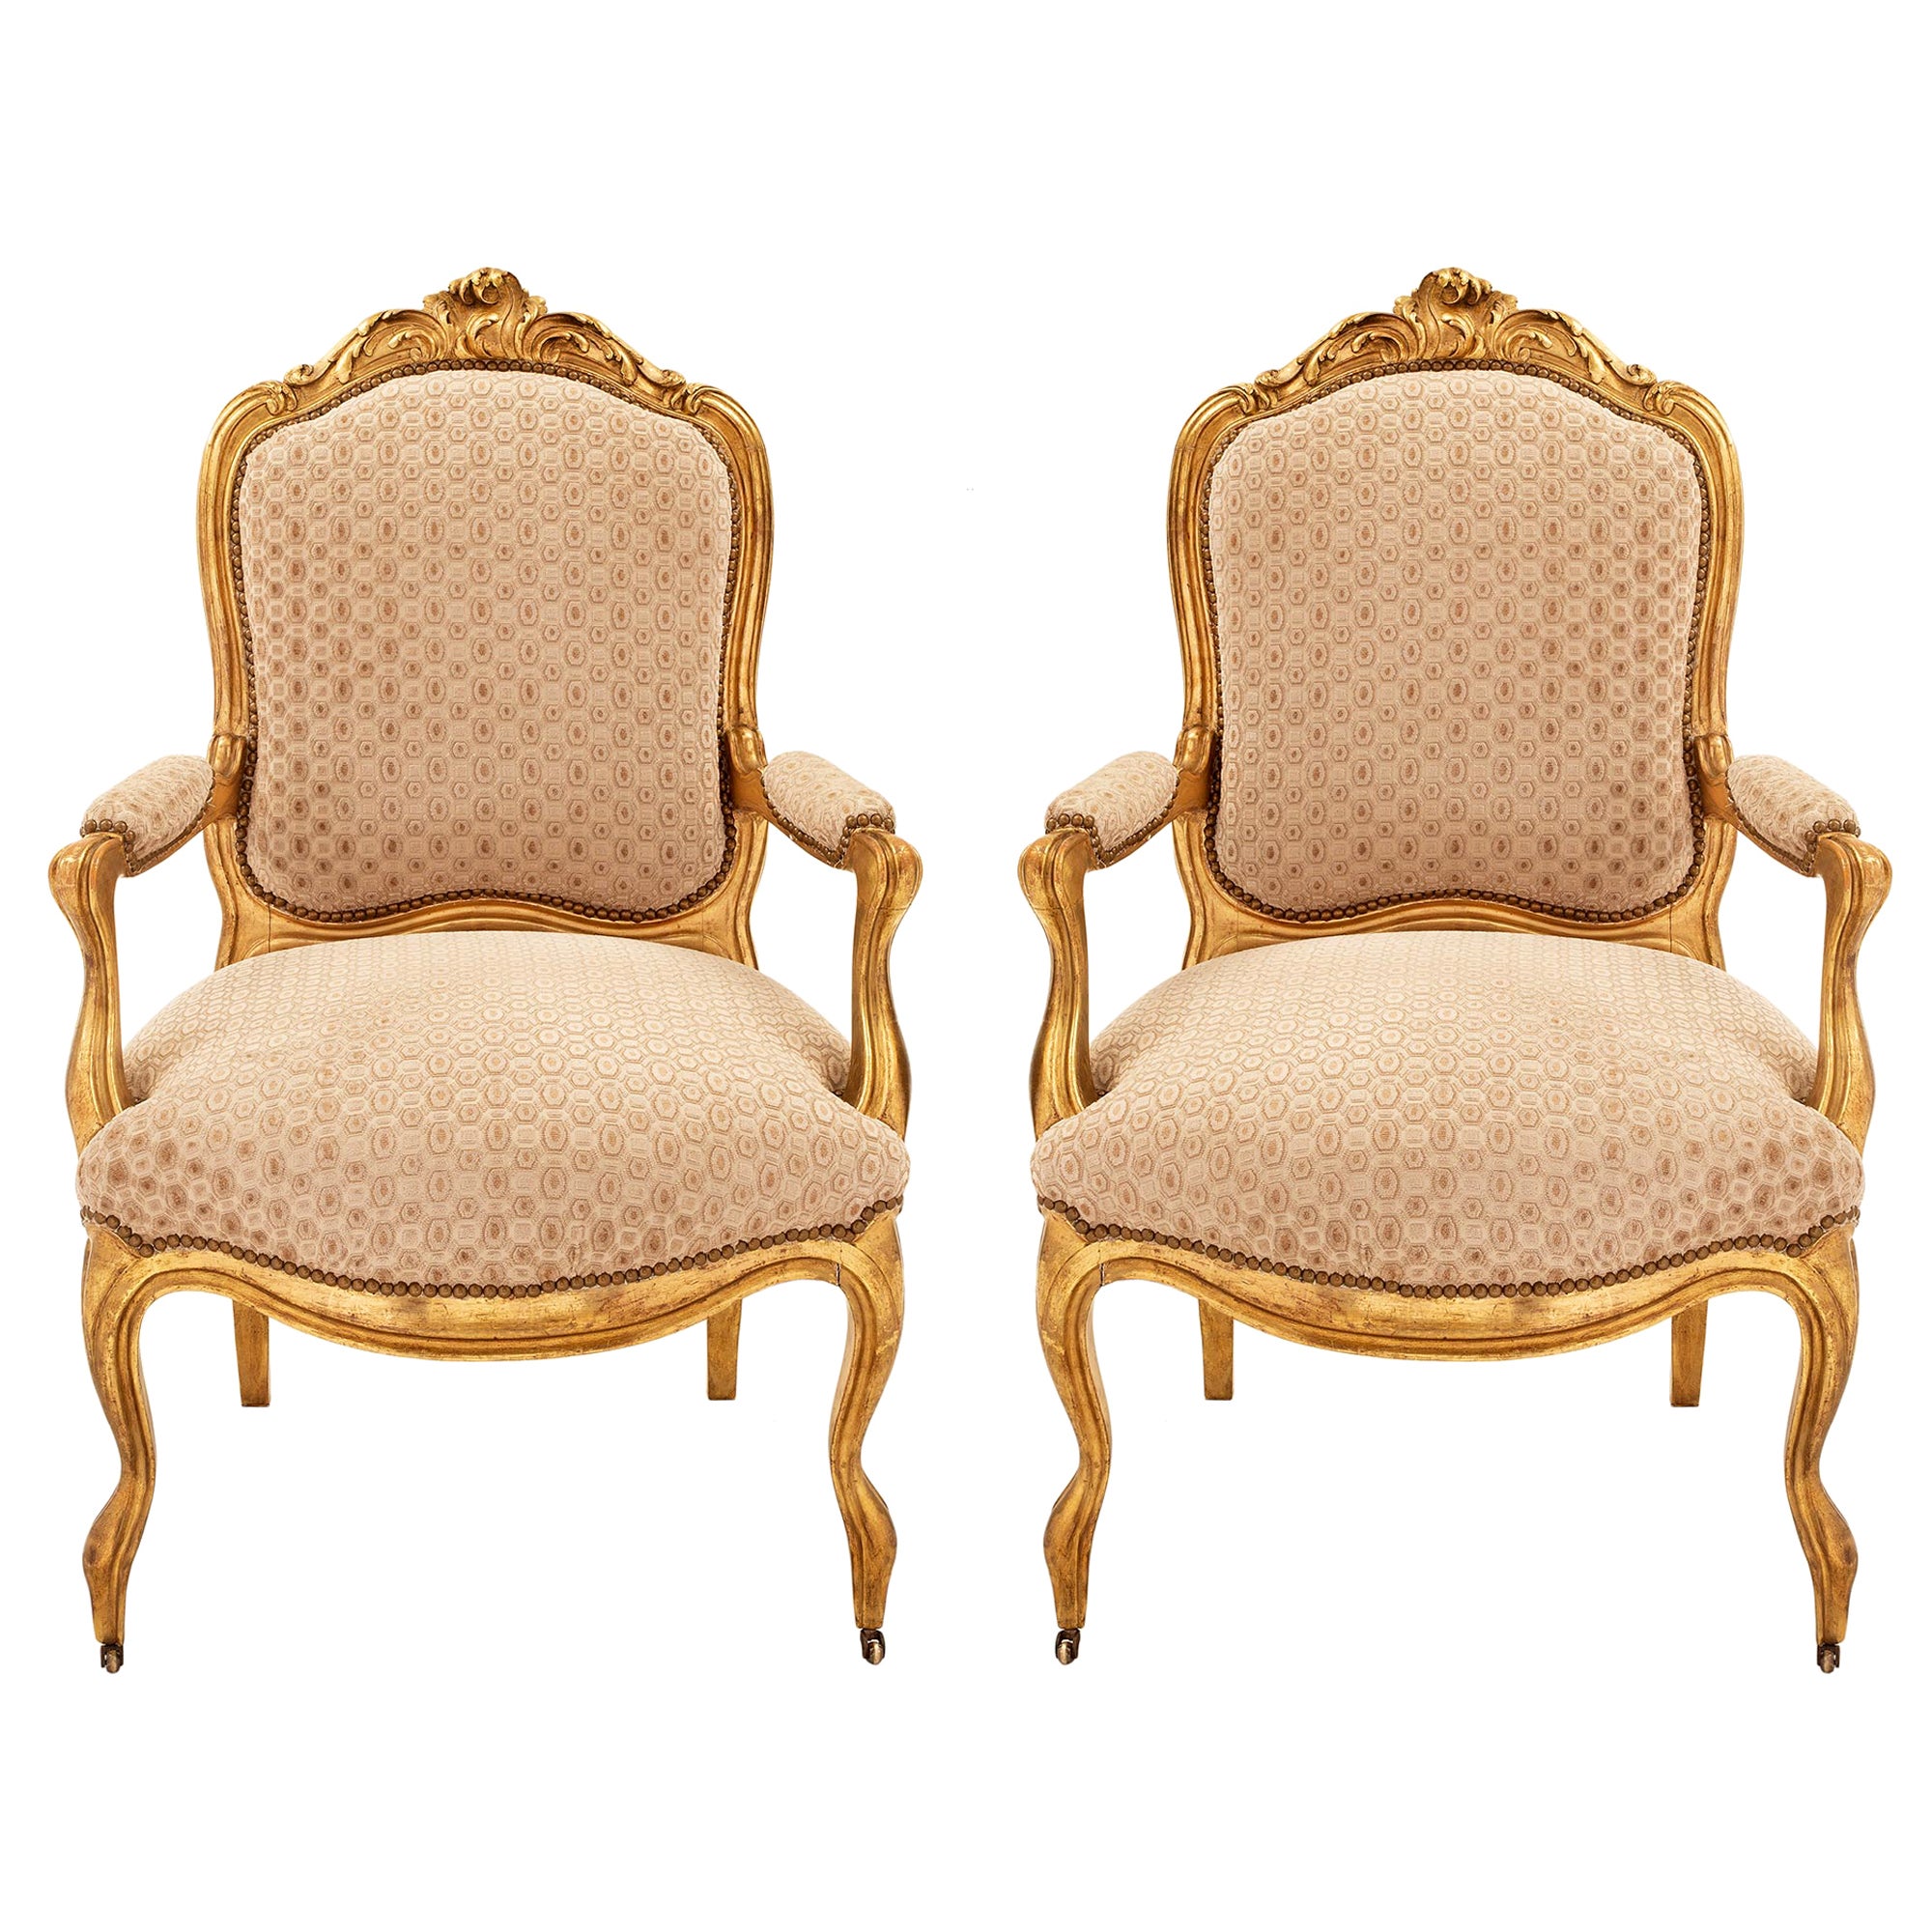 Pair of French 19th Century Louis XV Style Giltwood Armchairs